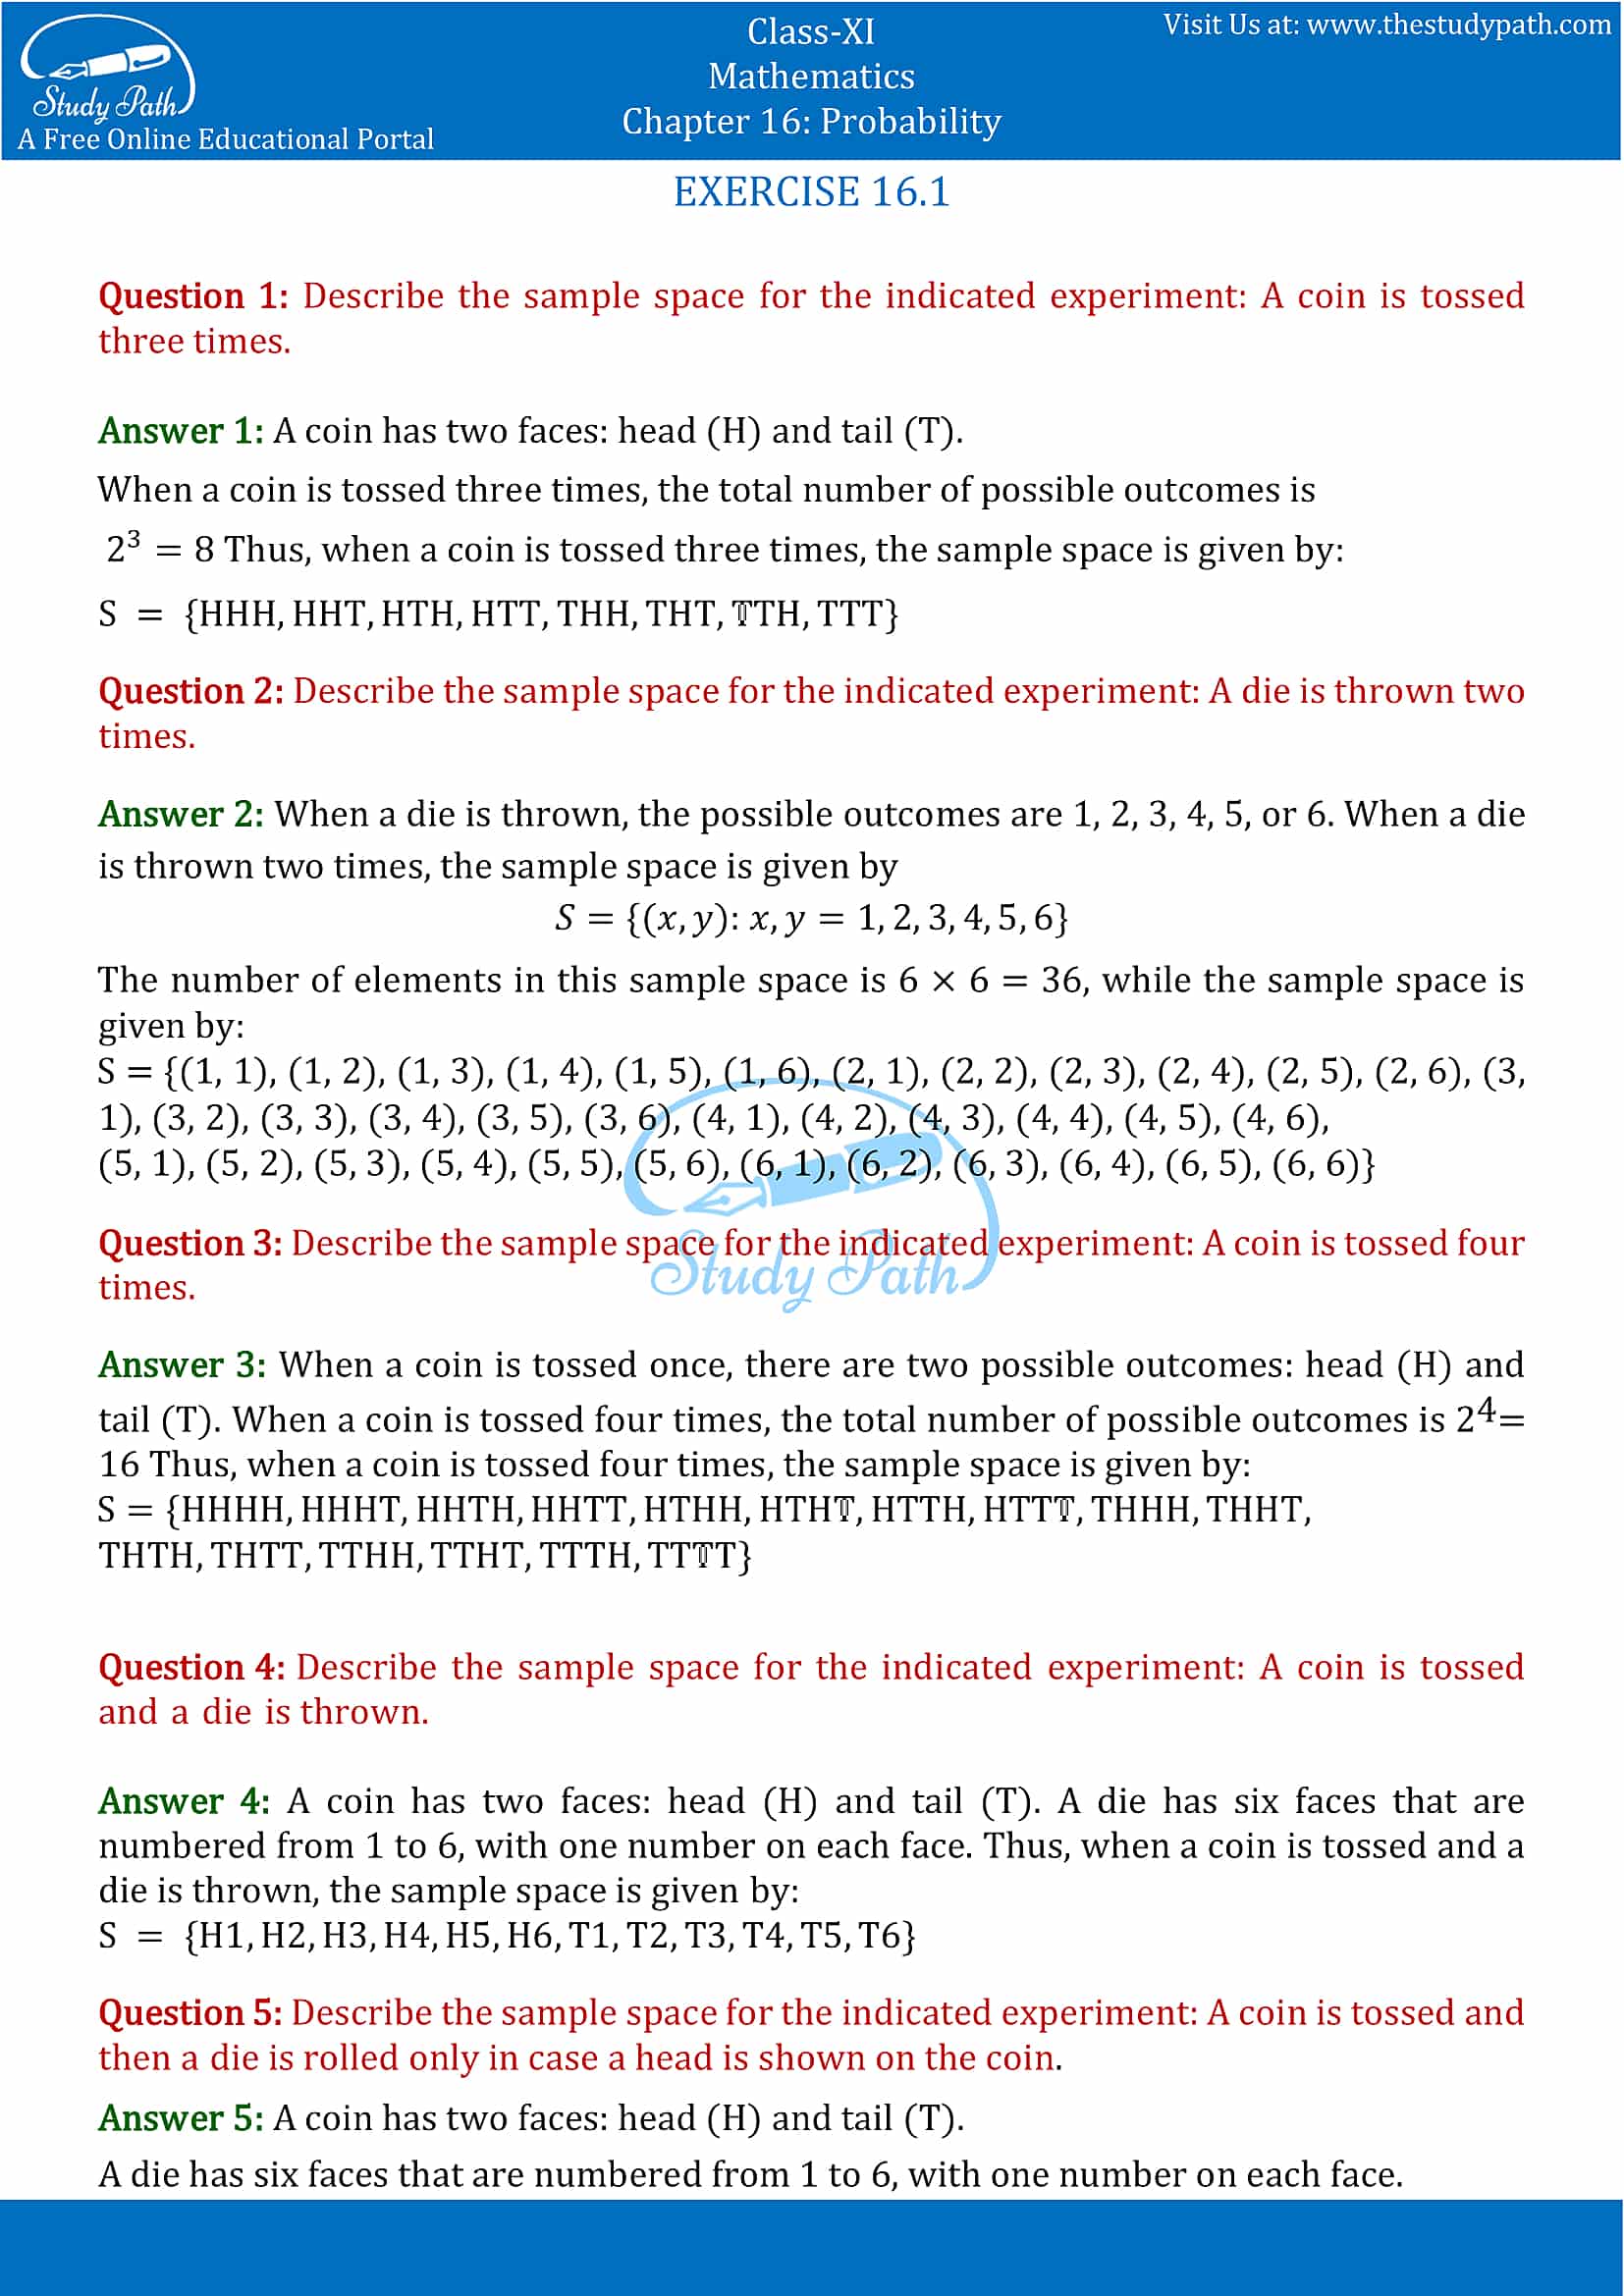 NCERT Solutions for Class 11 Maths chapter 16 Probability Exercise 16.1 part-1